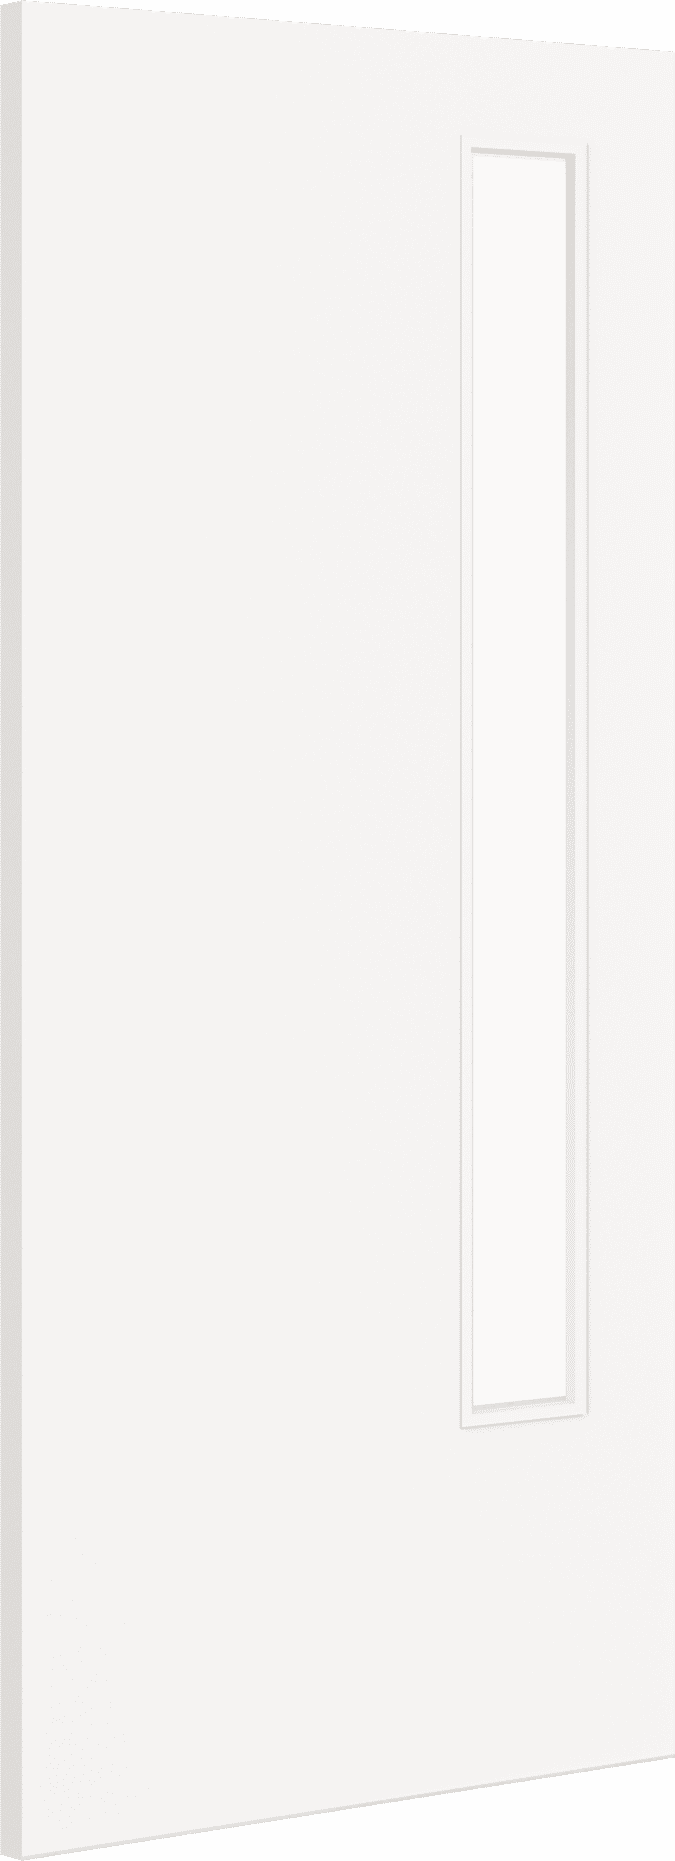 2040mm x 626mm x 44mm Architectural Paint Grade White 13 Frosted Glazed Fire Door Blank